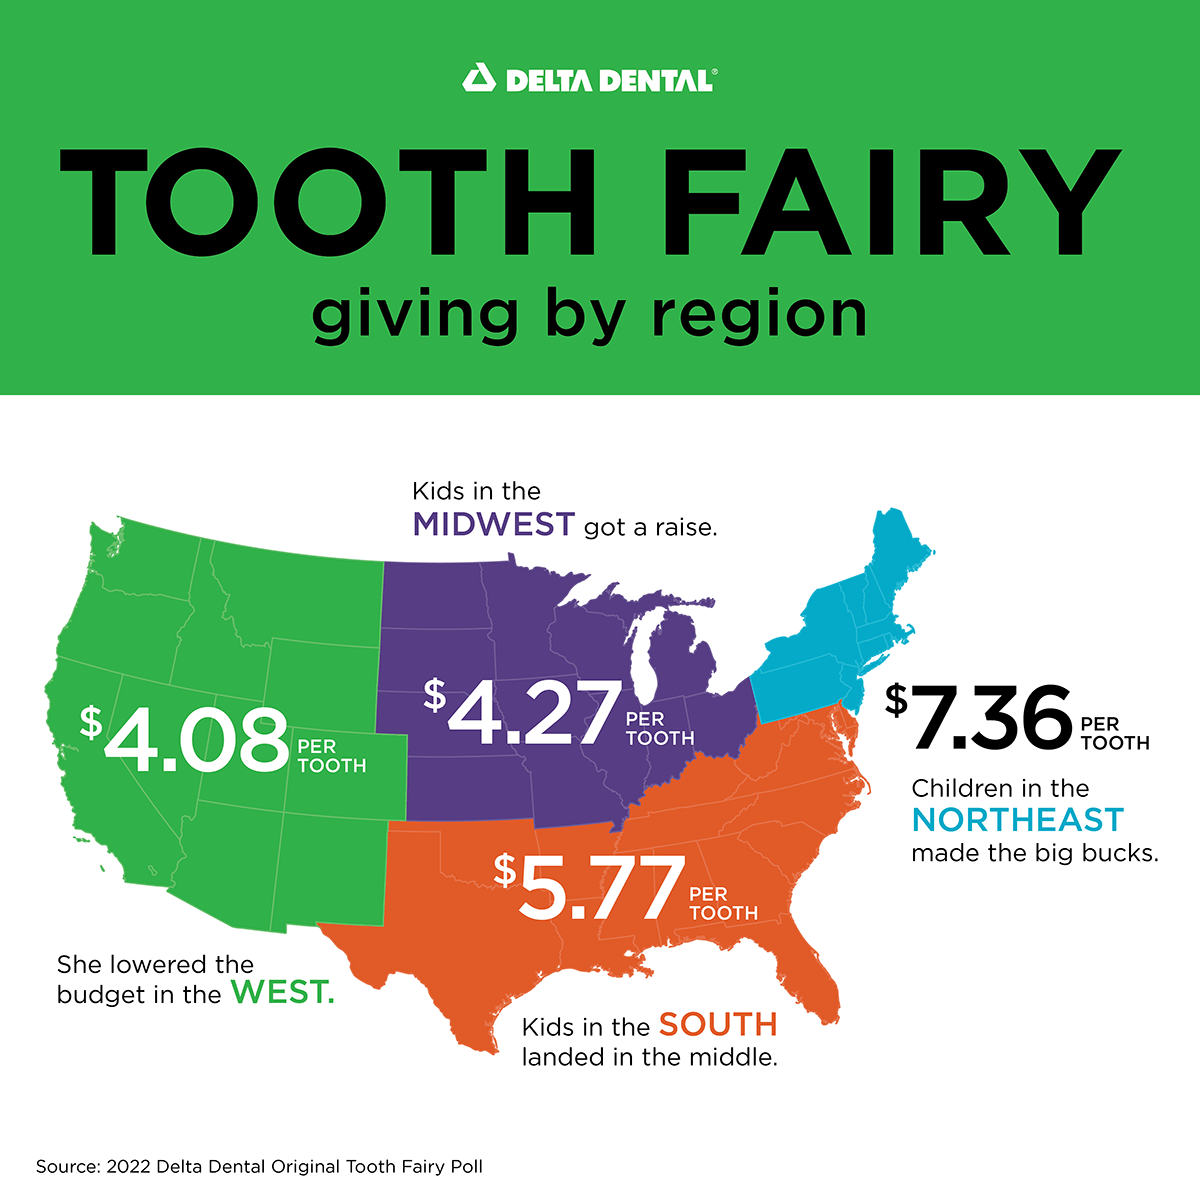 icon of United States showing regions and amounts per 2022 the Tooth Fairy poll 